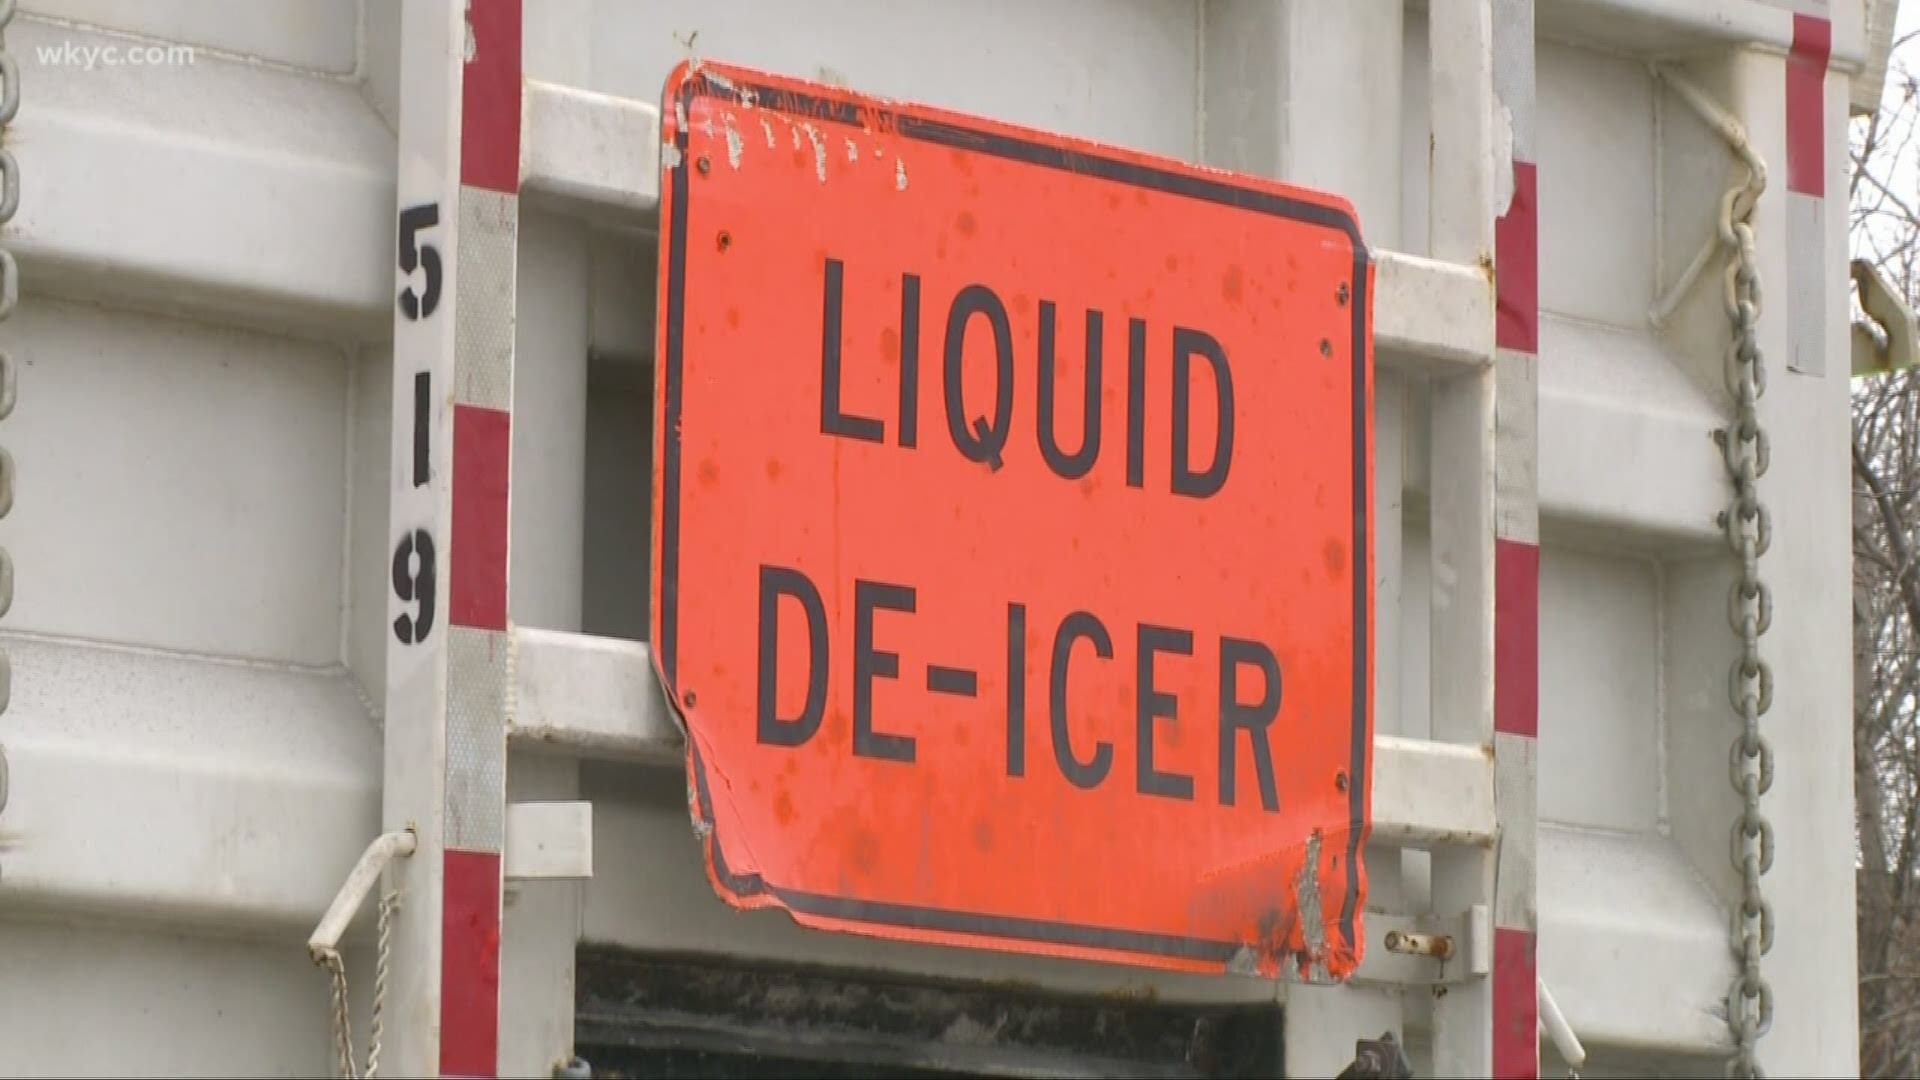 Environmental watchdogs want at least one de-icing product and certain types of brine banned from Ohio roads. They cite radioactive concerns.